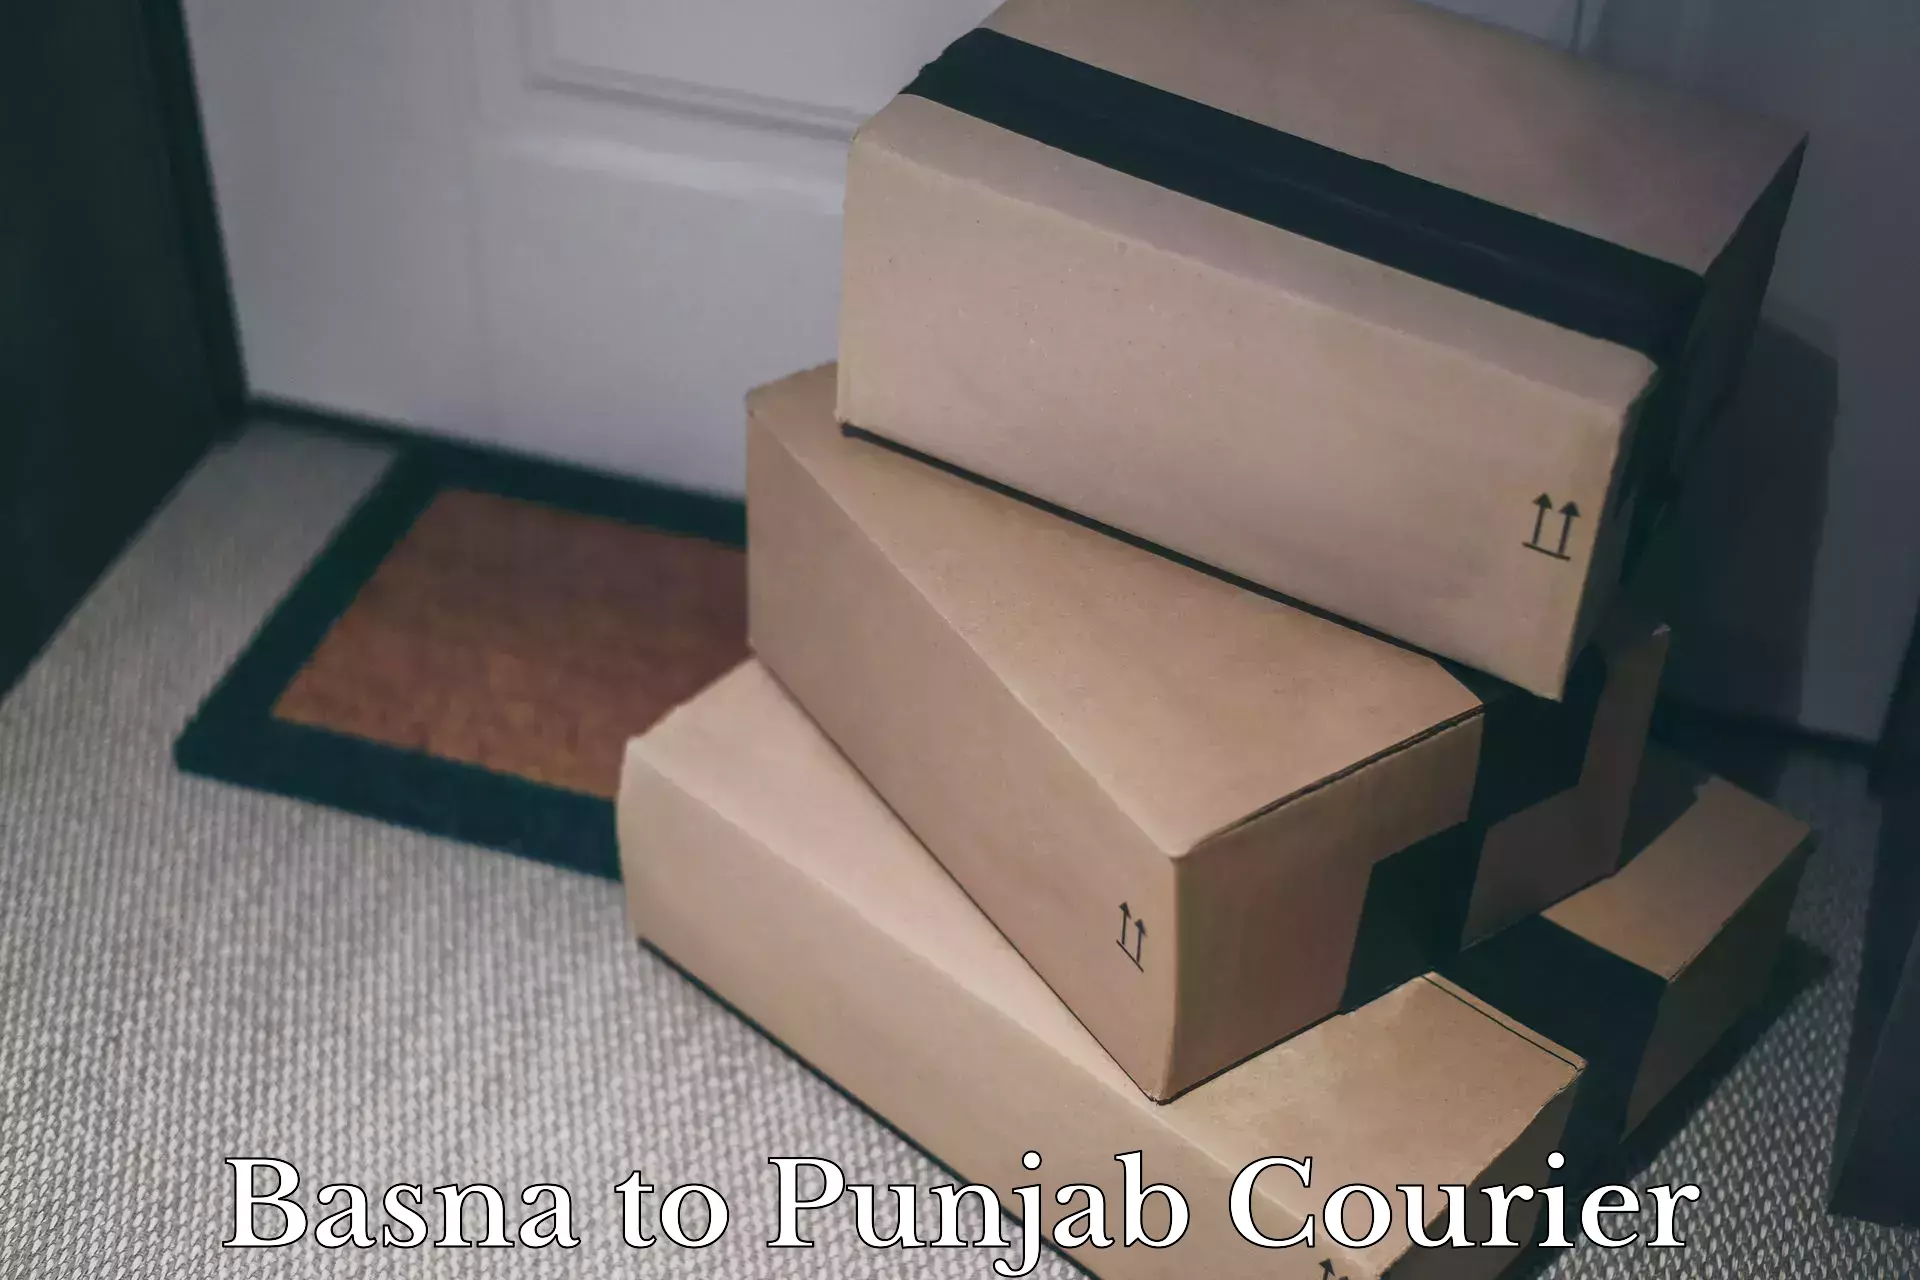 Professional packing services Basna to Rajpura